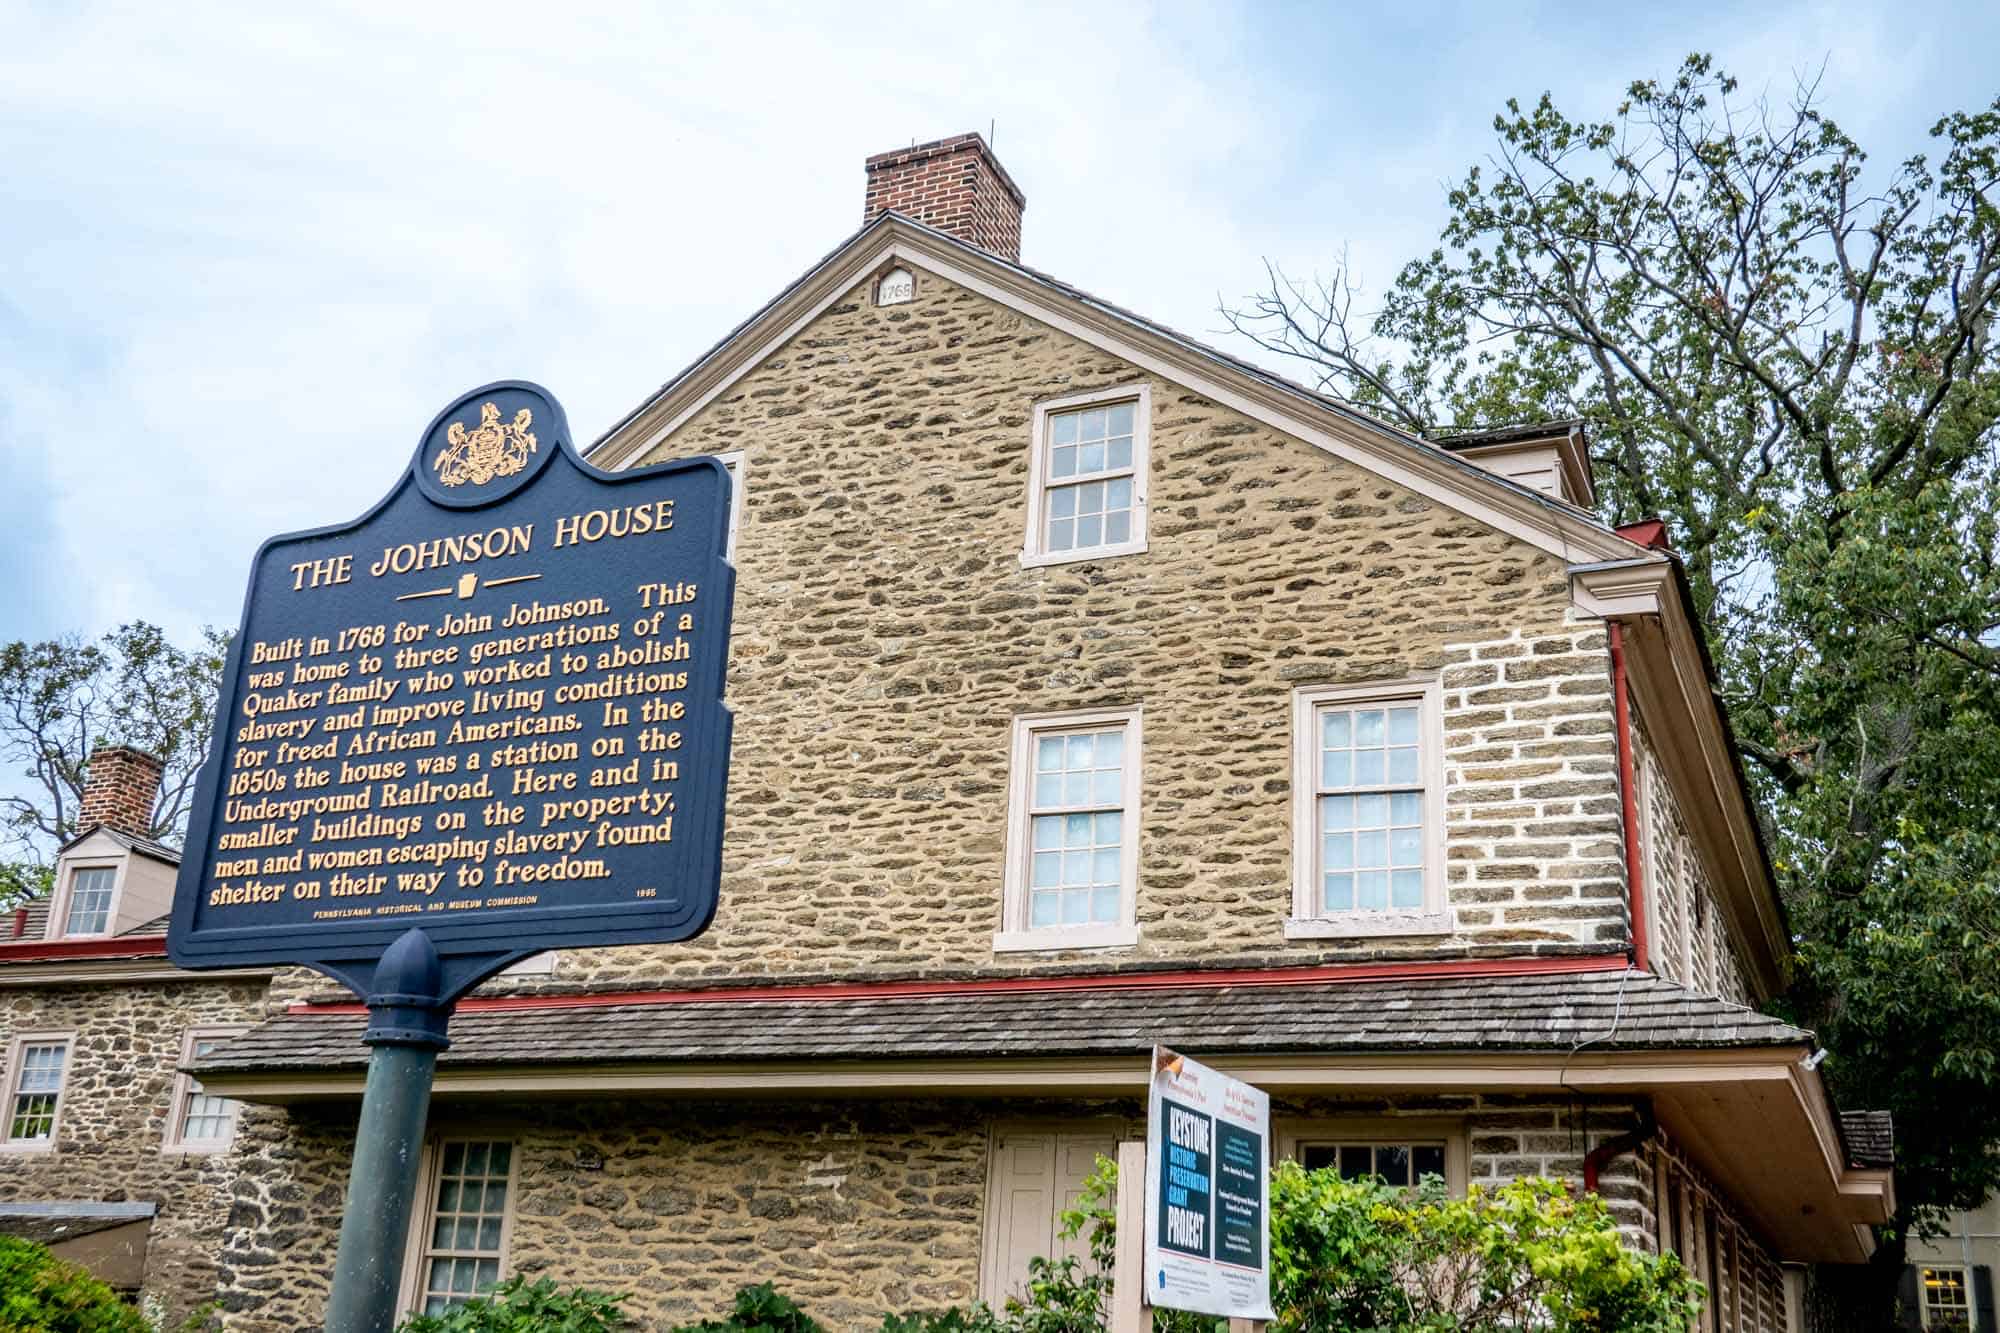 Stone building with an historical sign: "The Johnson House. Built in 1768 for John Johnson. This was home to three generations of a Quaker family who worked to abolish slavery and improve living conditions for freed African Americans. In the 1850s the house was a station on the Underground Railroad. Here and in smaller buildings on the property, men and women escaping slavery found shelter on their way to freedom." 